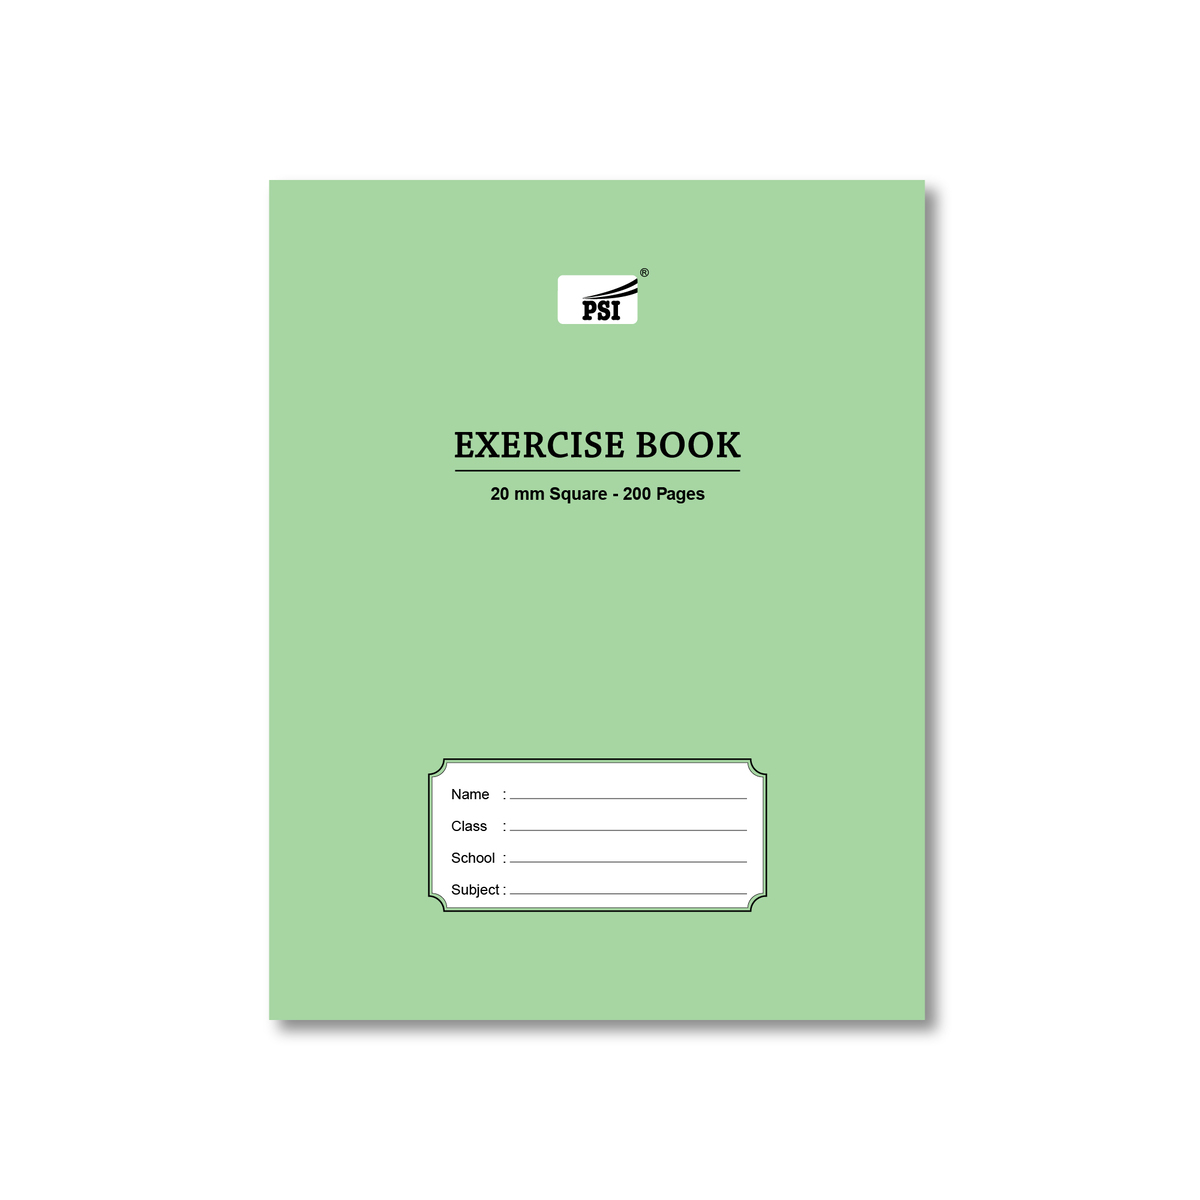 PSI Exercise Book 20mm Square 200 Pages 20M200